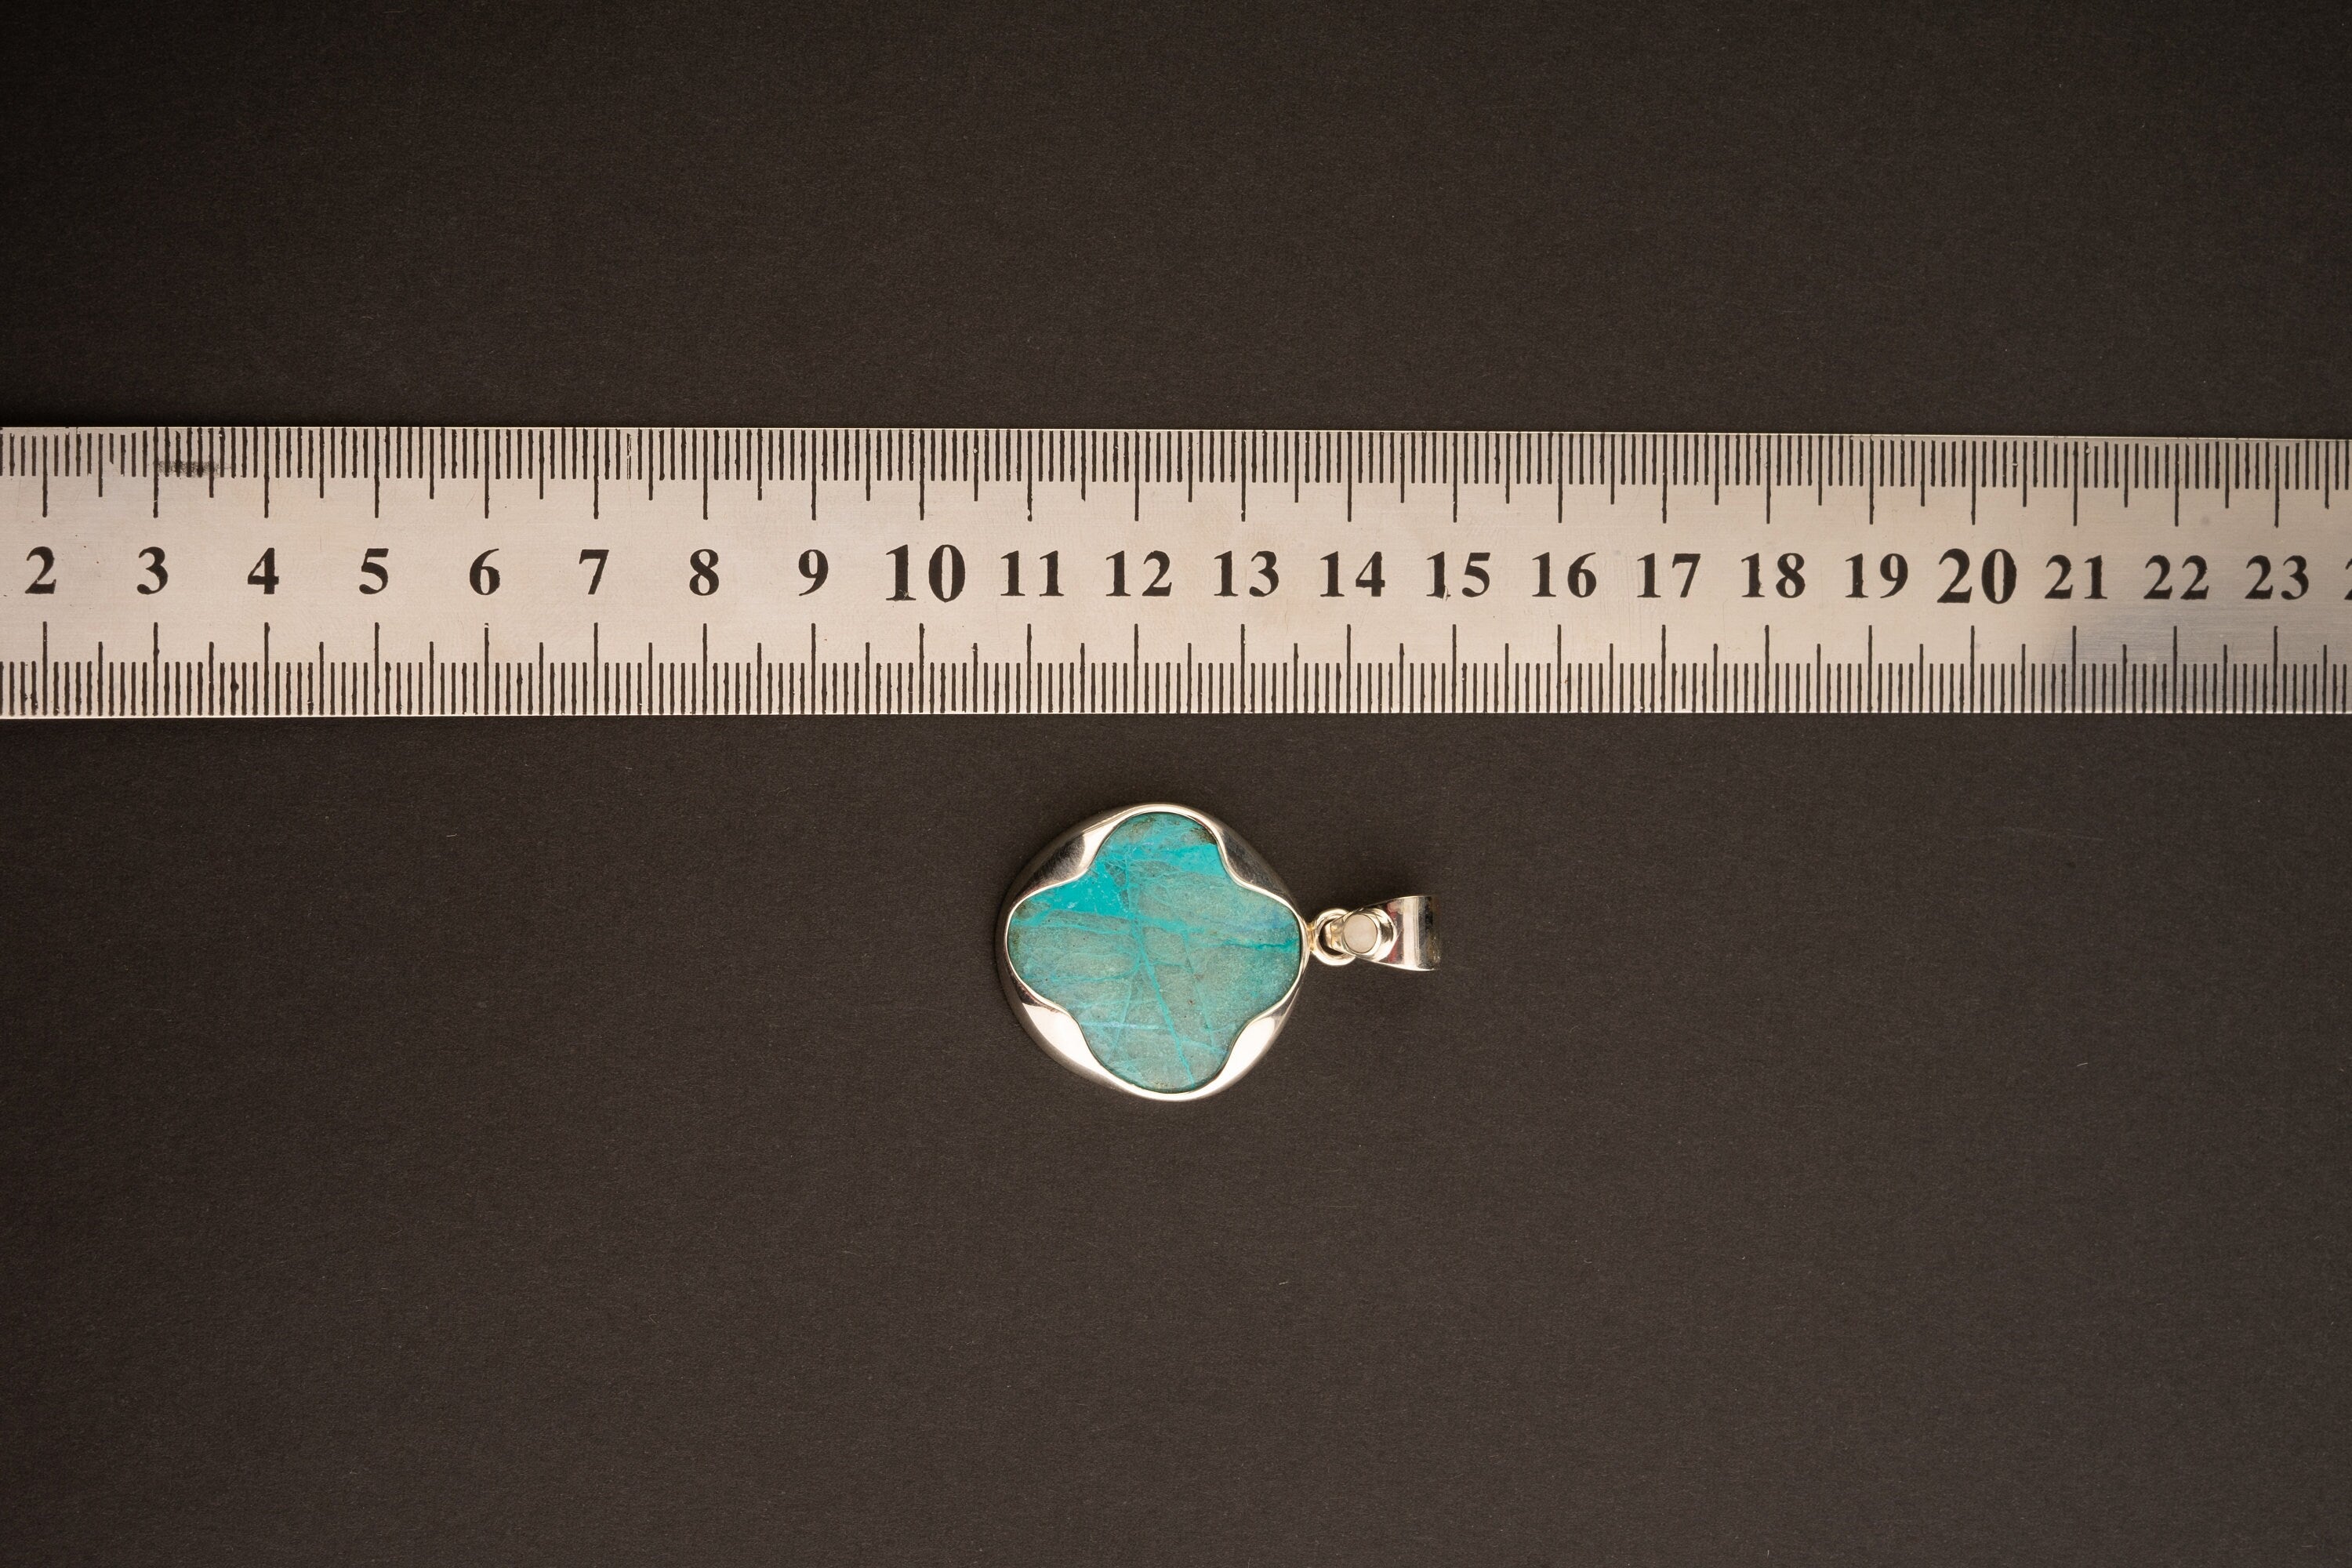 ONEe Rare exquisite Gem Silica Chrysocolla crowned with Moonstone - Crystal Pendant - 925 Sterling Silver - rounded Bezel open-back set